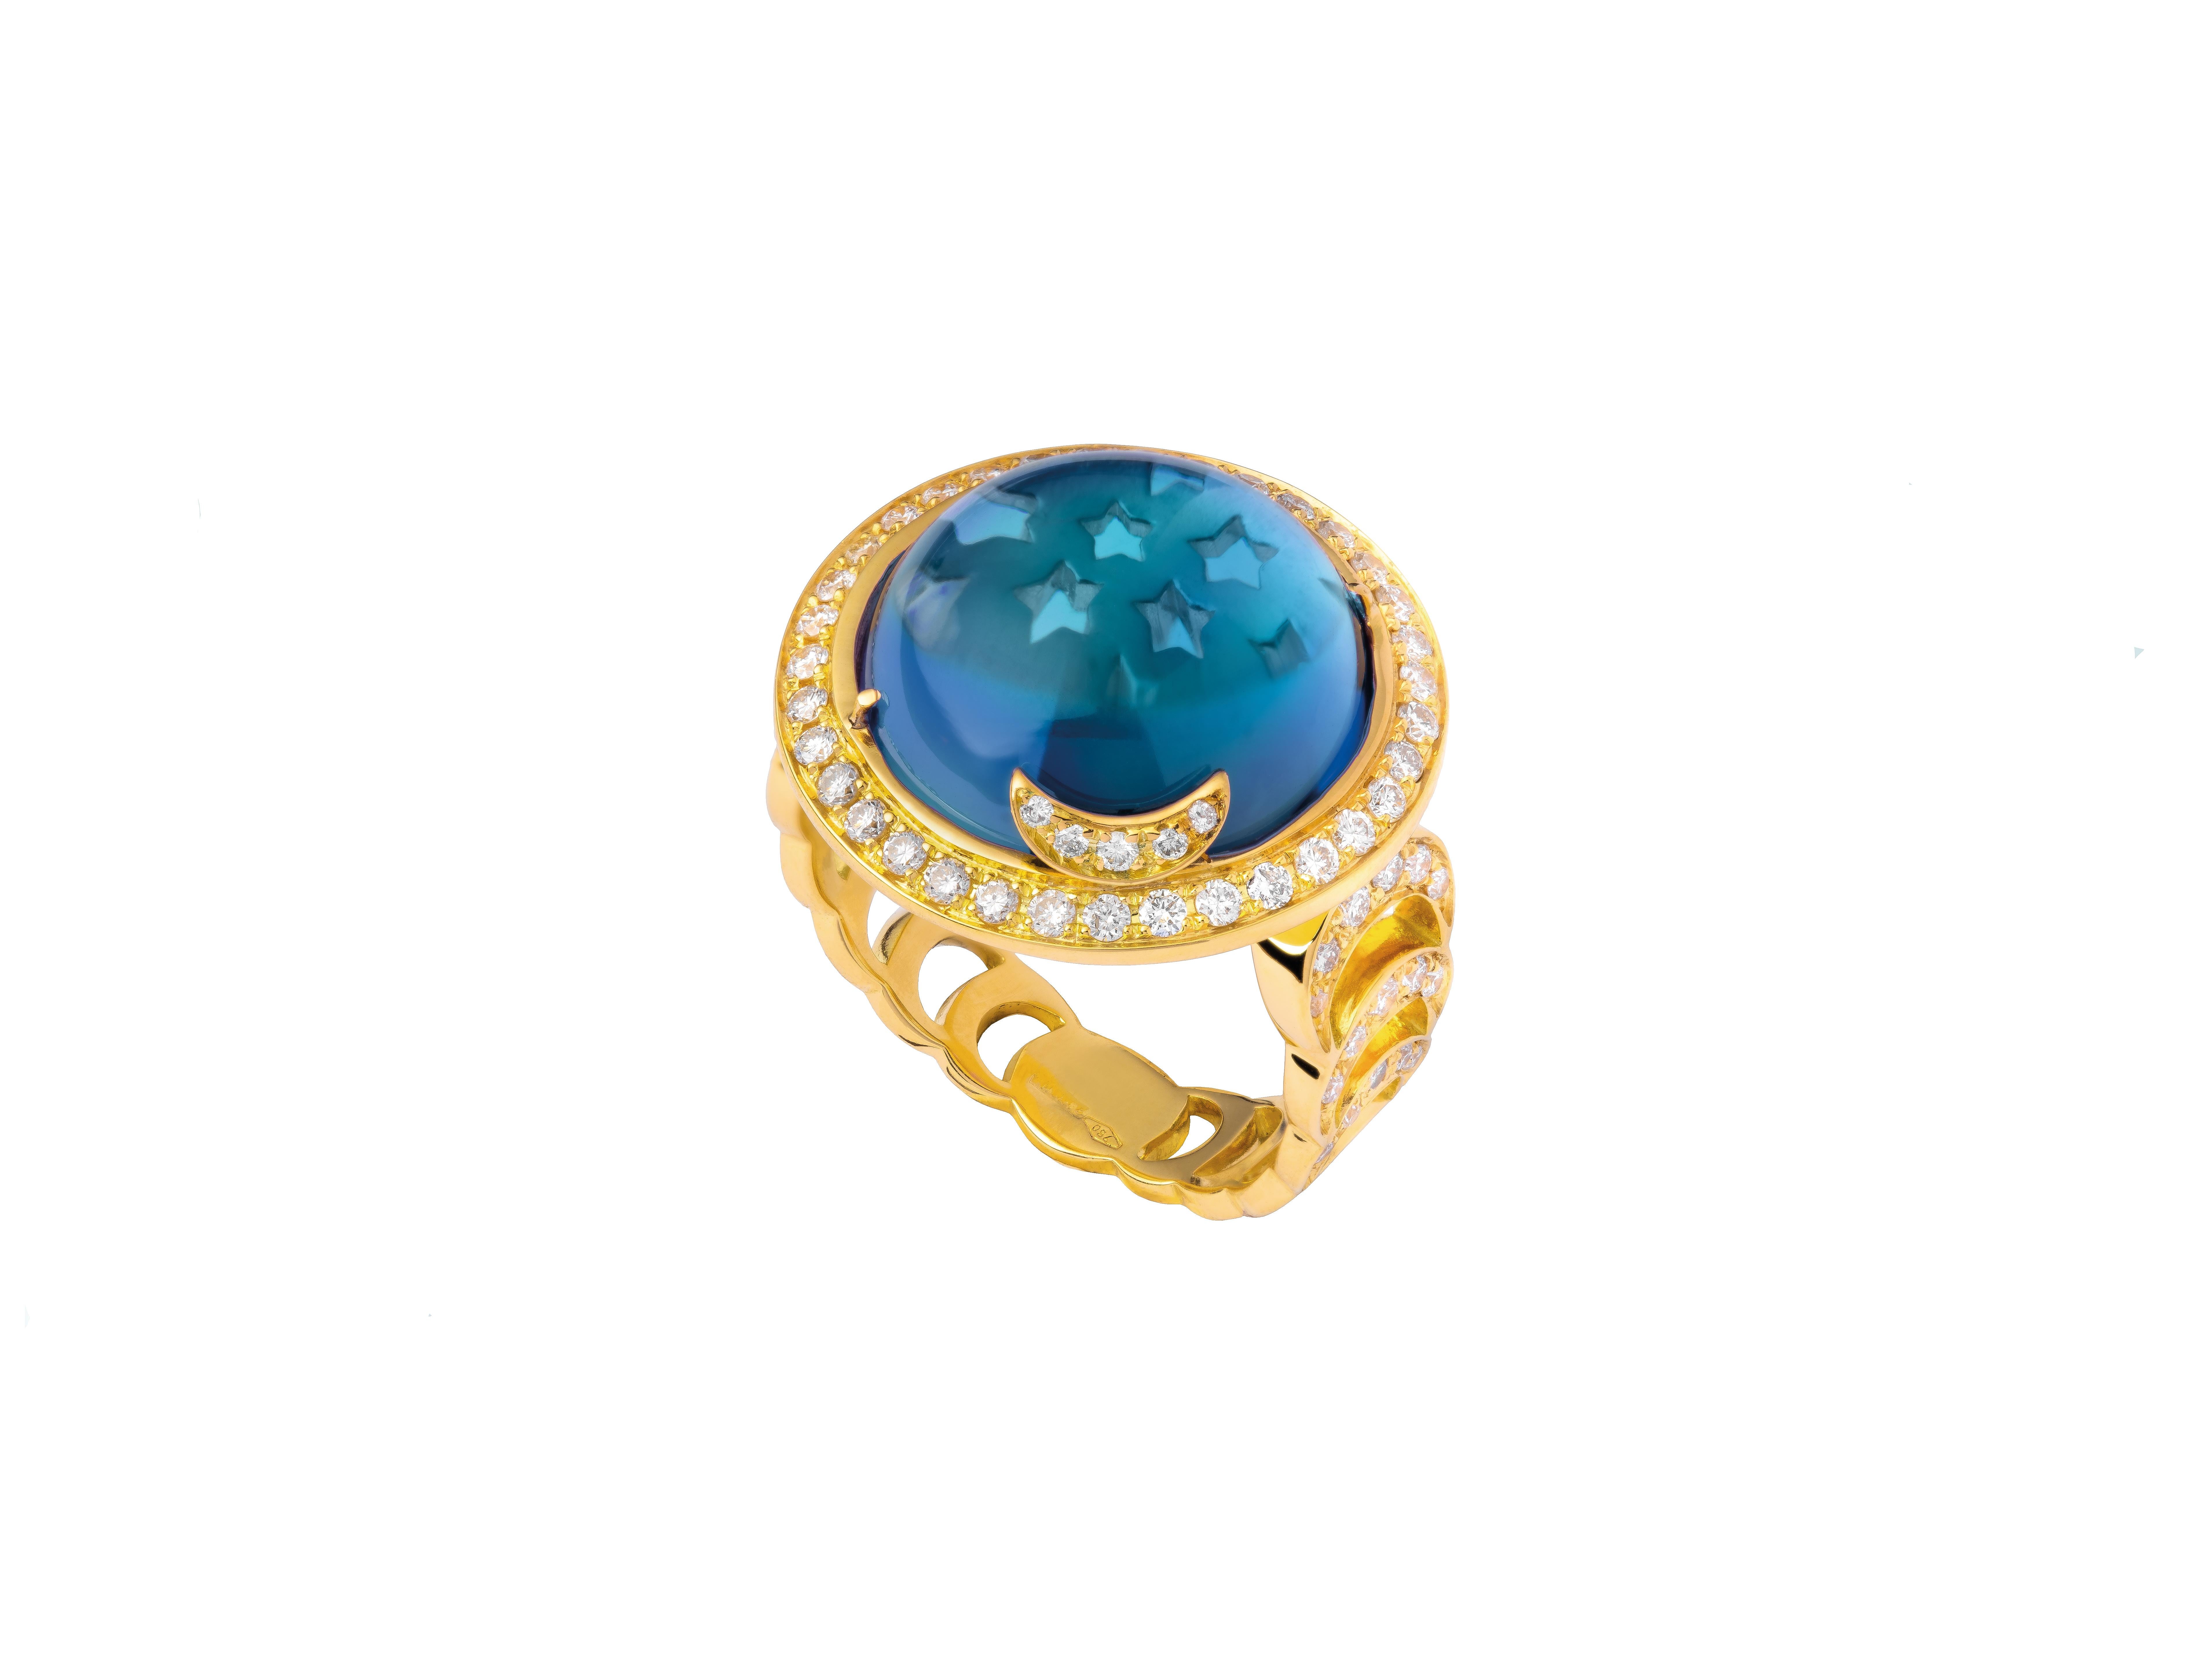 Andromeda ring

18kt yellow gold, 13.60 ct Blue Topaz round cabochon, 0.89 ct White Diamonds, 9.00 gr total gold.

The « Andromeda » ring is a magical constellation. The band is paved with diamonds or sapphires and represents the moon phases, ending